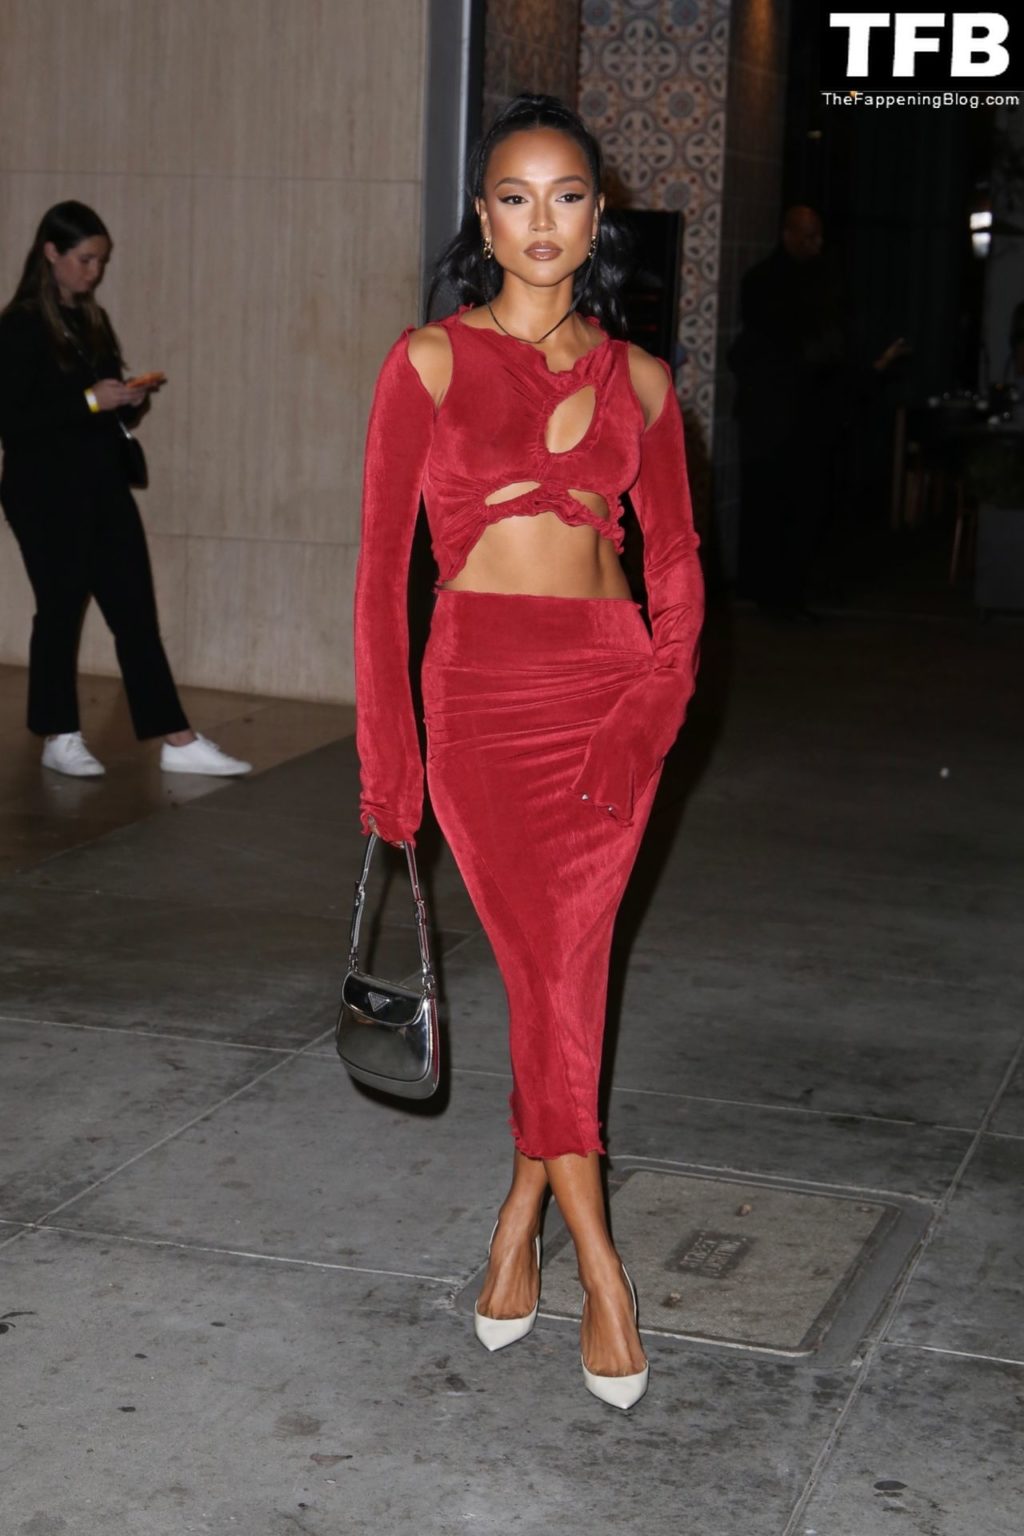 Karrueche Tran Sexy The Fappening Blog 37 1024x1536 - Karrueche Tran Shows Her Pokies in a Red Dress at The Hollywood Reporter’s Oscar Nominees Night (68 Photos)